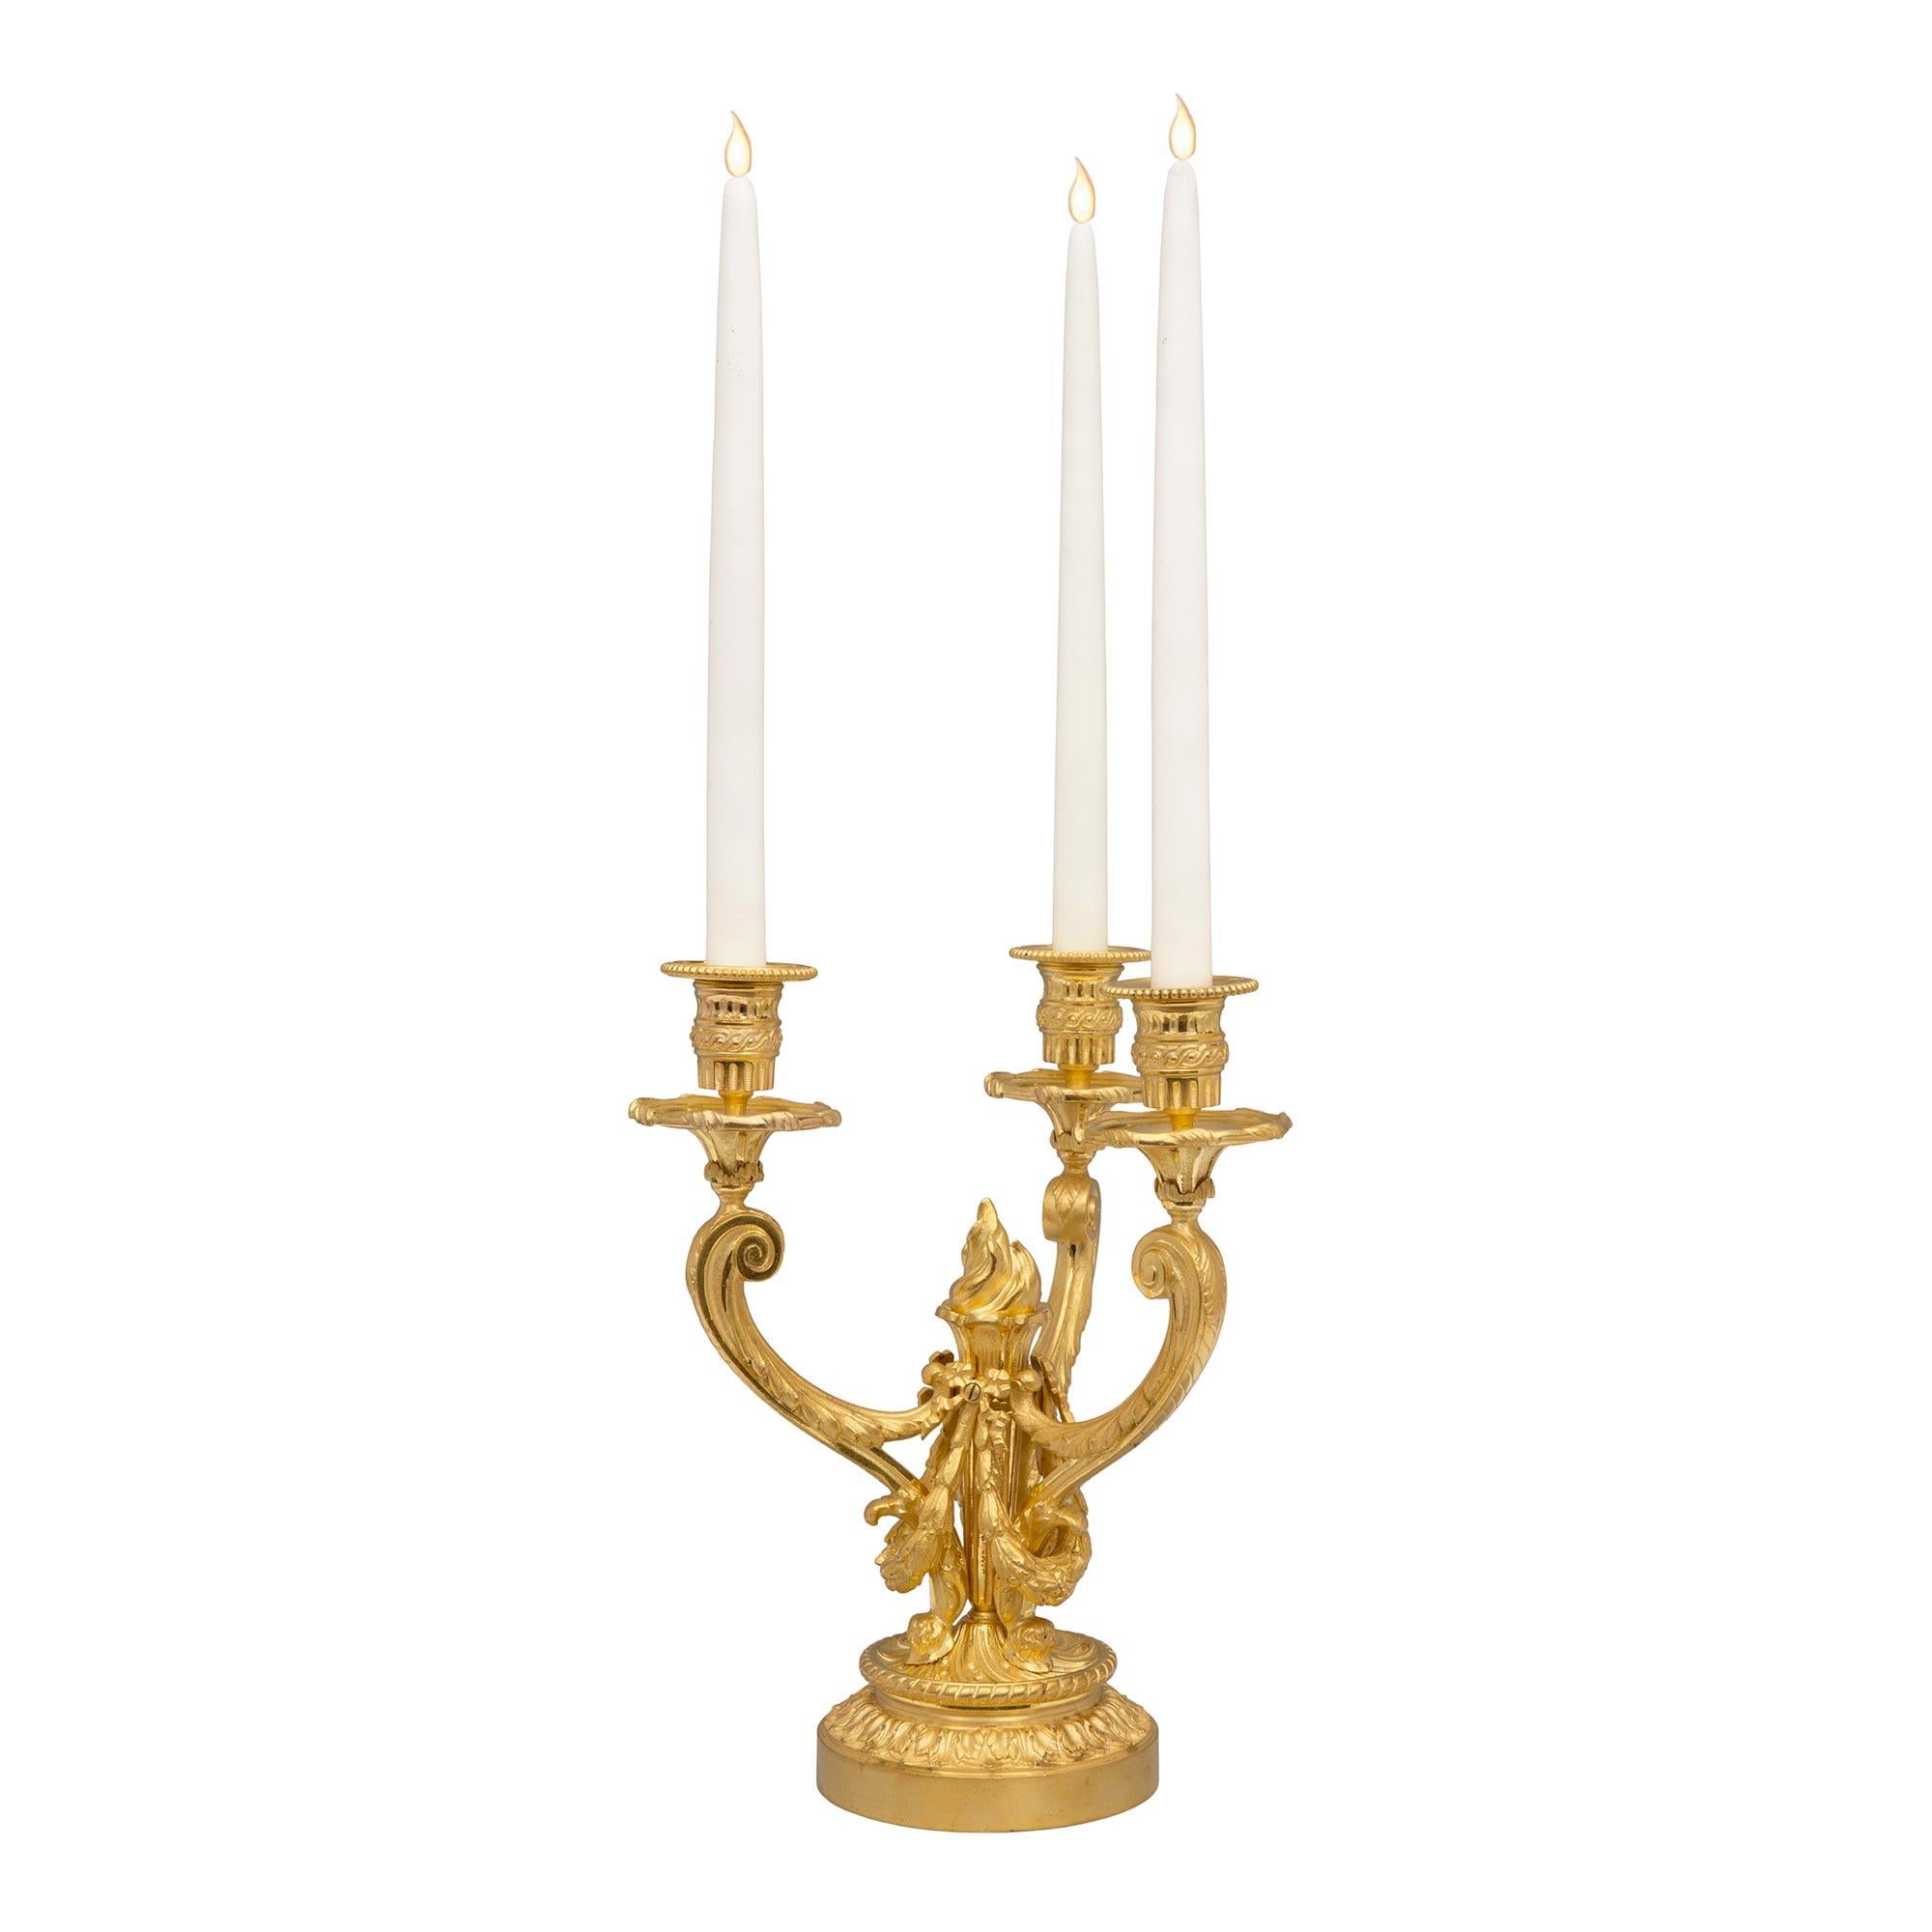 Pair of French 19th Century Louis XVI Style Ormolu Three-Arm Candelabras In Good Condition For Sale In West Palm Beach, FL